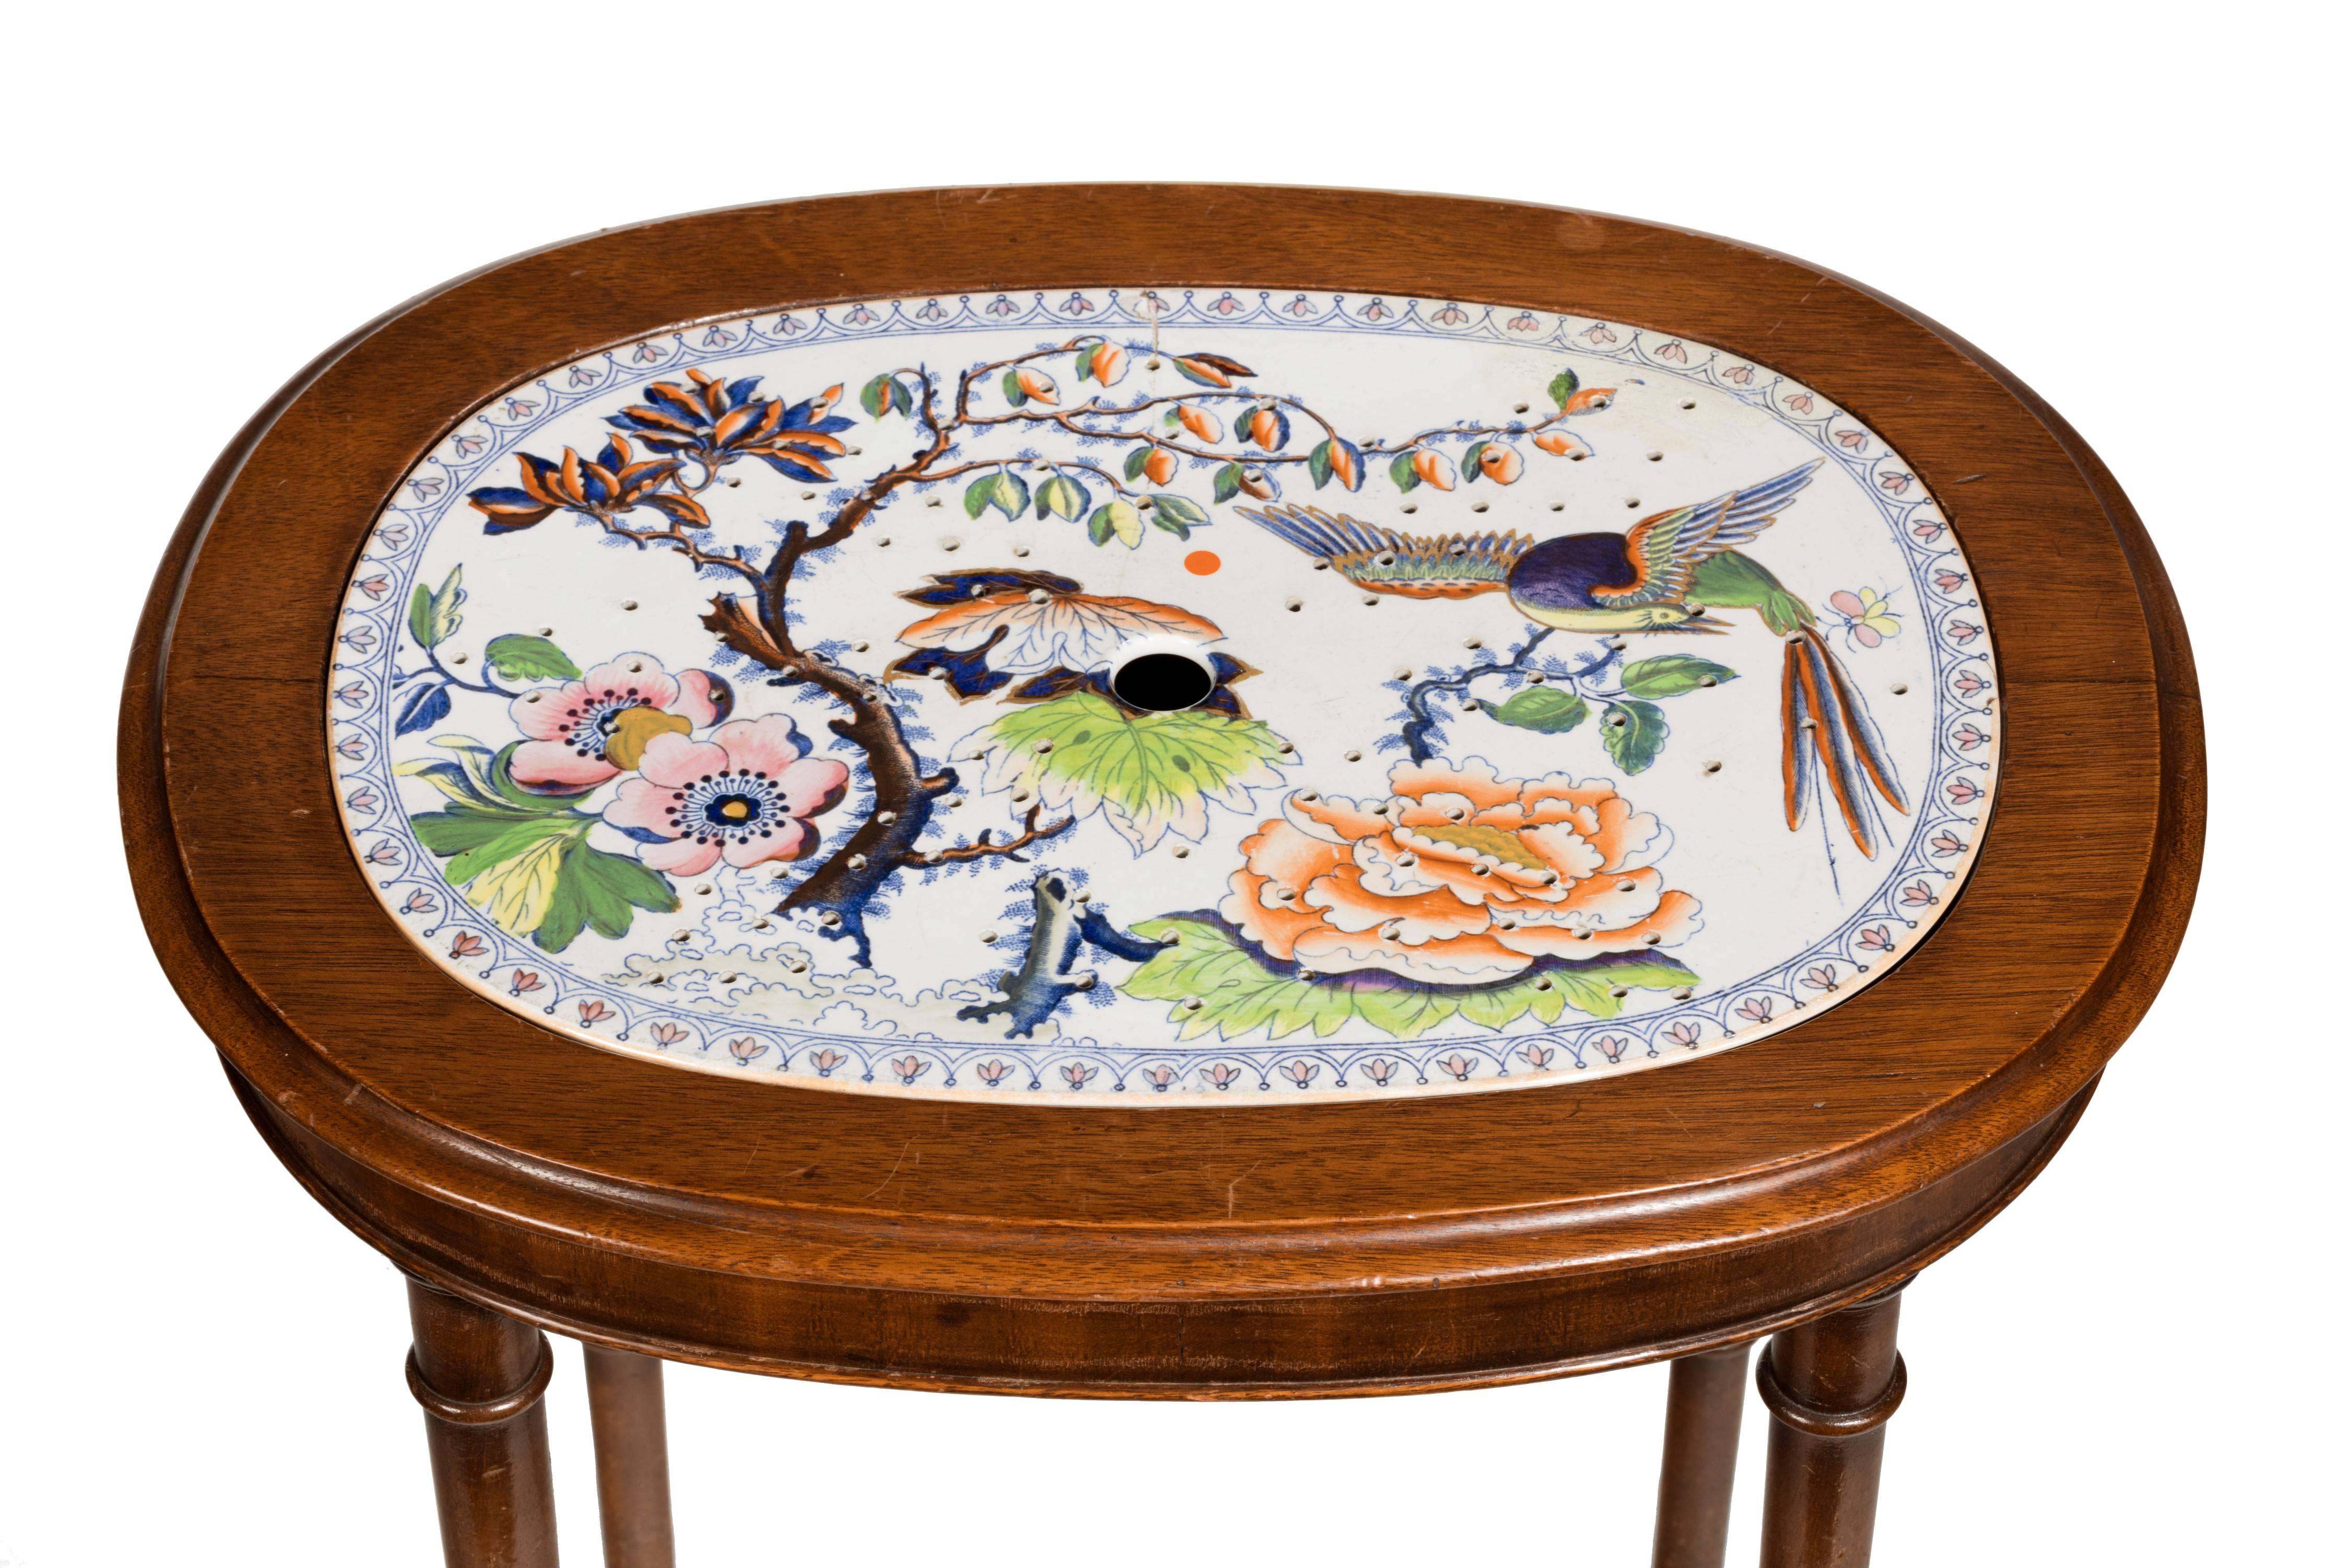 Early 20th Century Bespoke Low Table In Excellent Condition In Peterborough, Northamptonshire